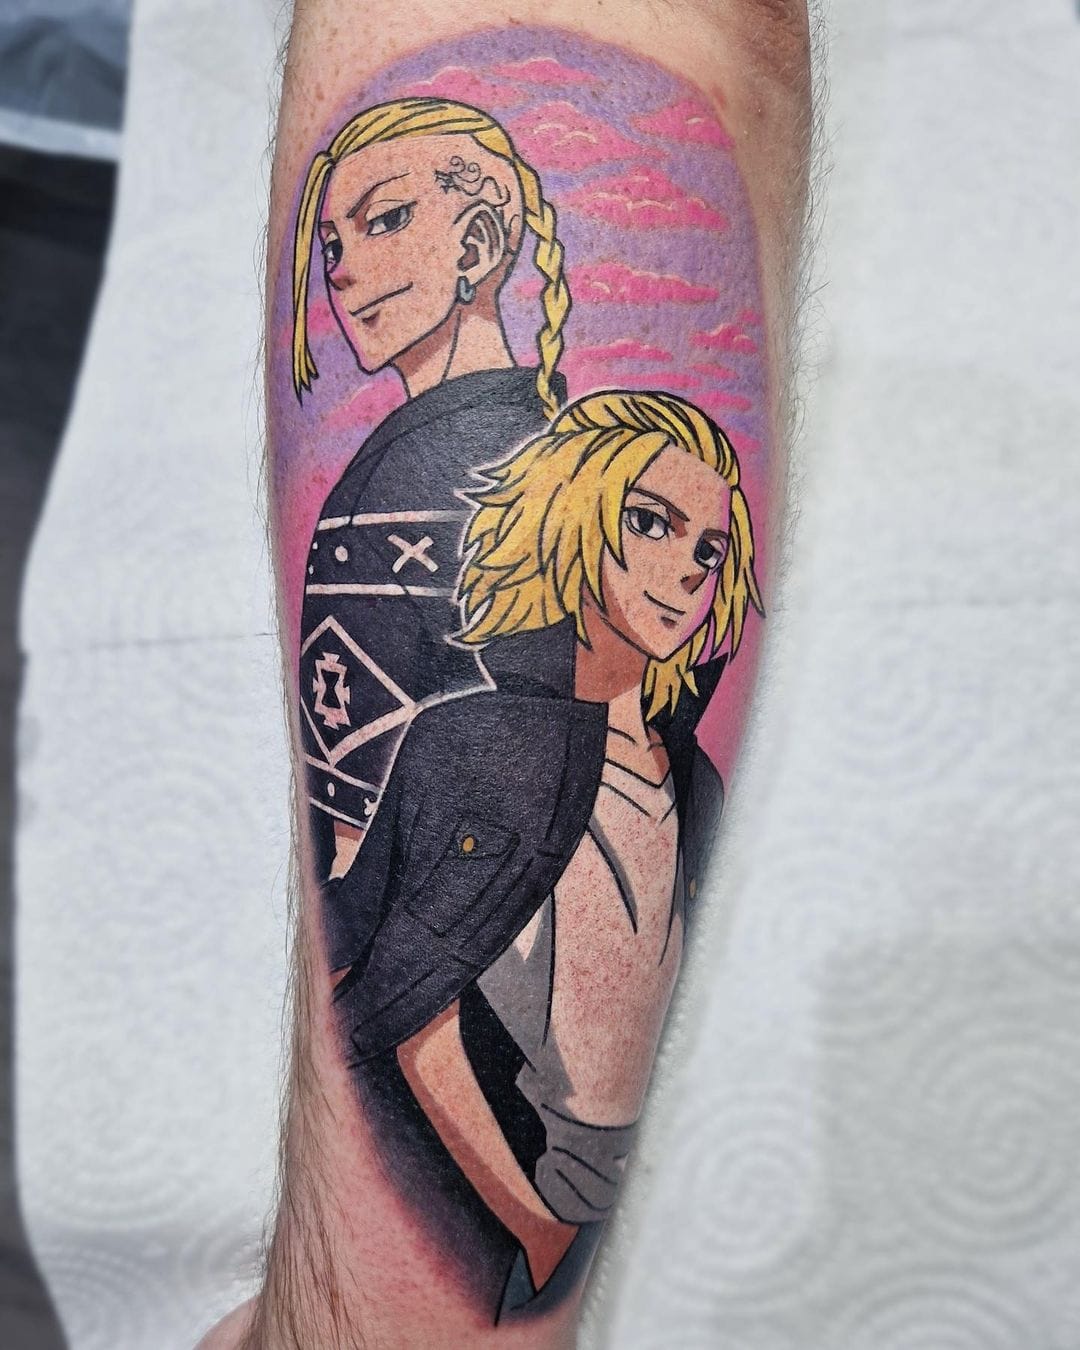 Mikey from Tokyo Revengers done by  Dos Tattoo  rnerdtattoos